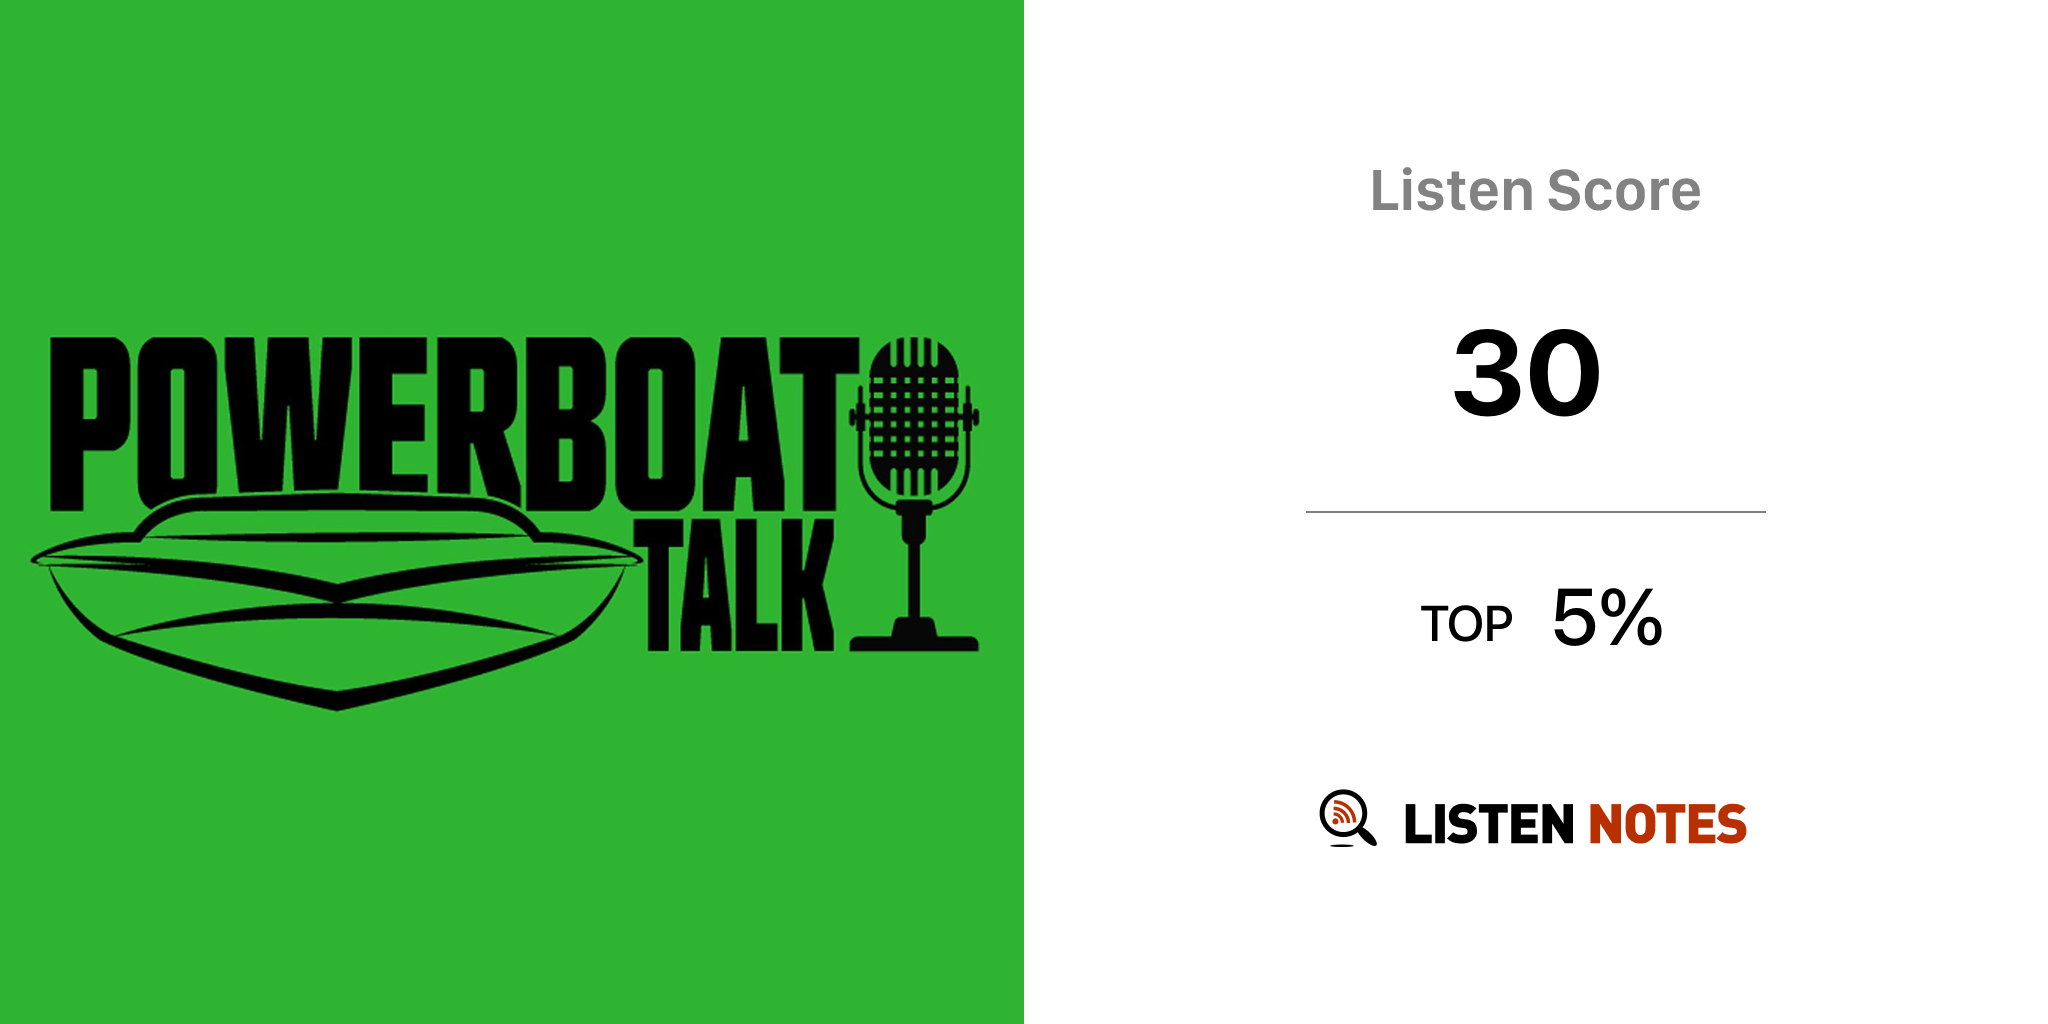 Podcast:0 - Caob:Outboard